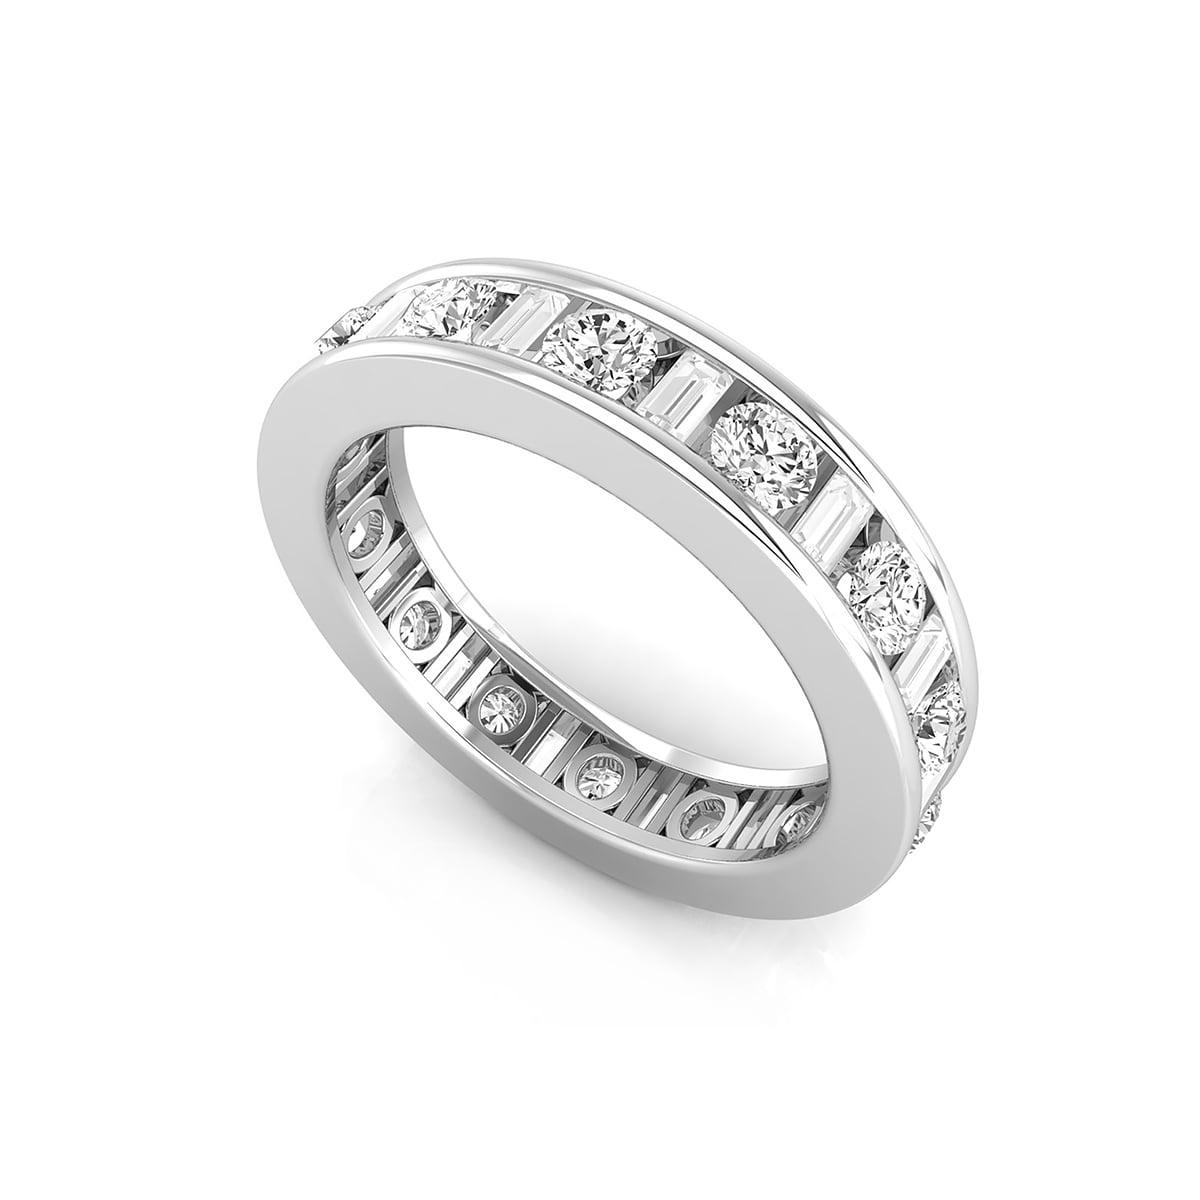 Channel Setting Round Or Baguette Cut CZ Stone Eternity Engagement Wedding Band For Ladies (2 1/3 TCW)